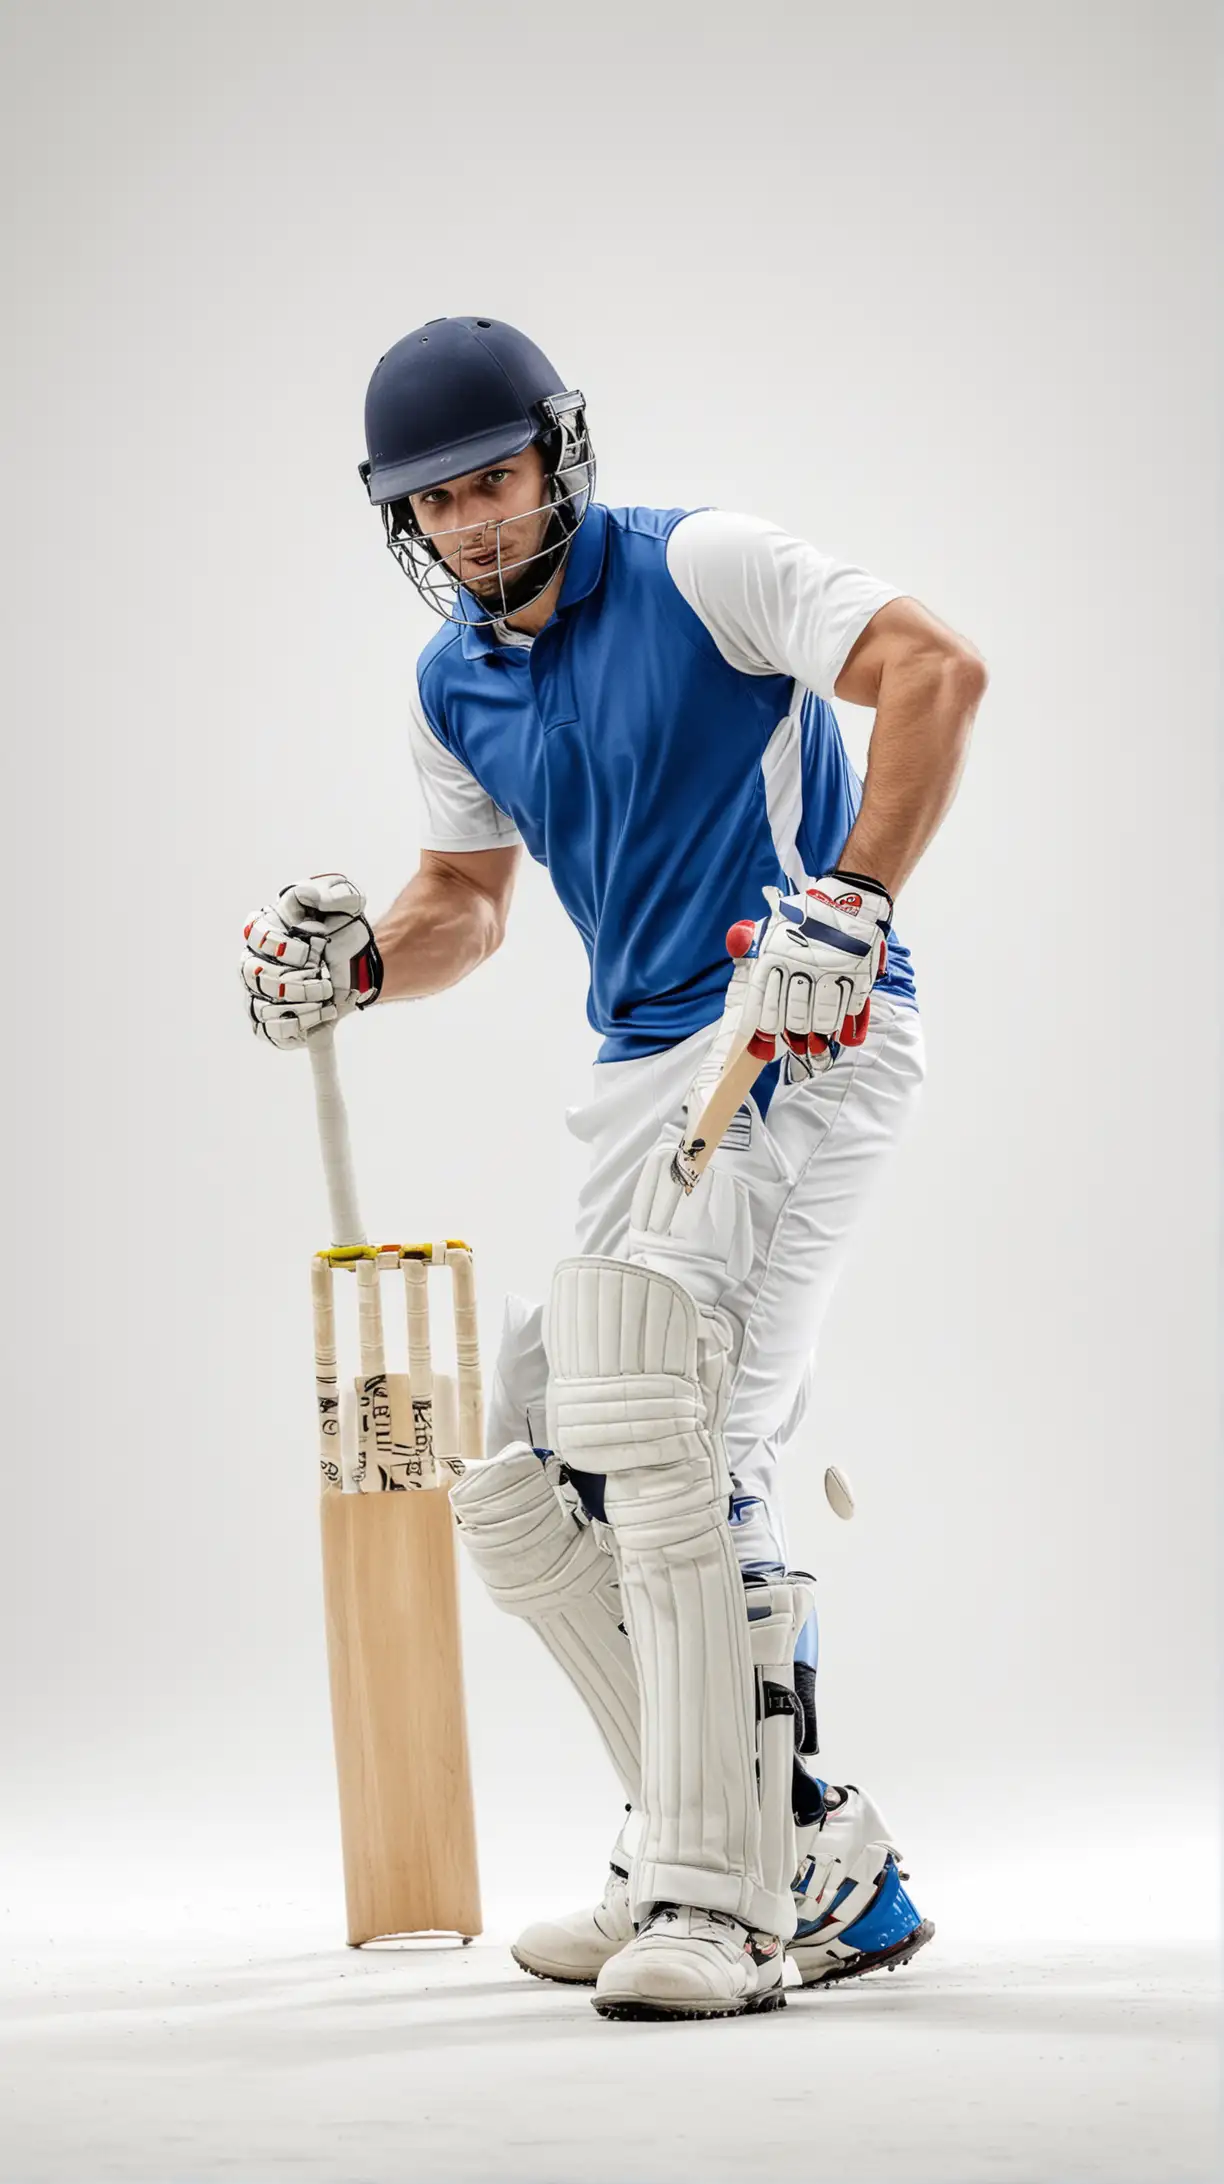 cricket player in action on a solid white background